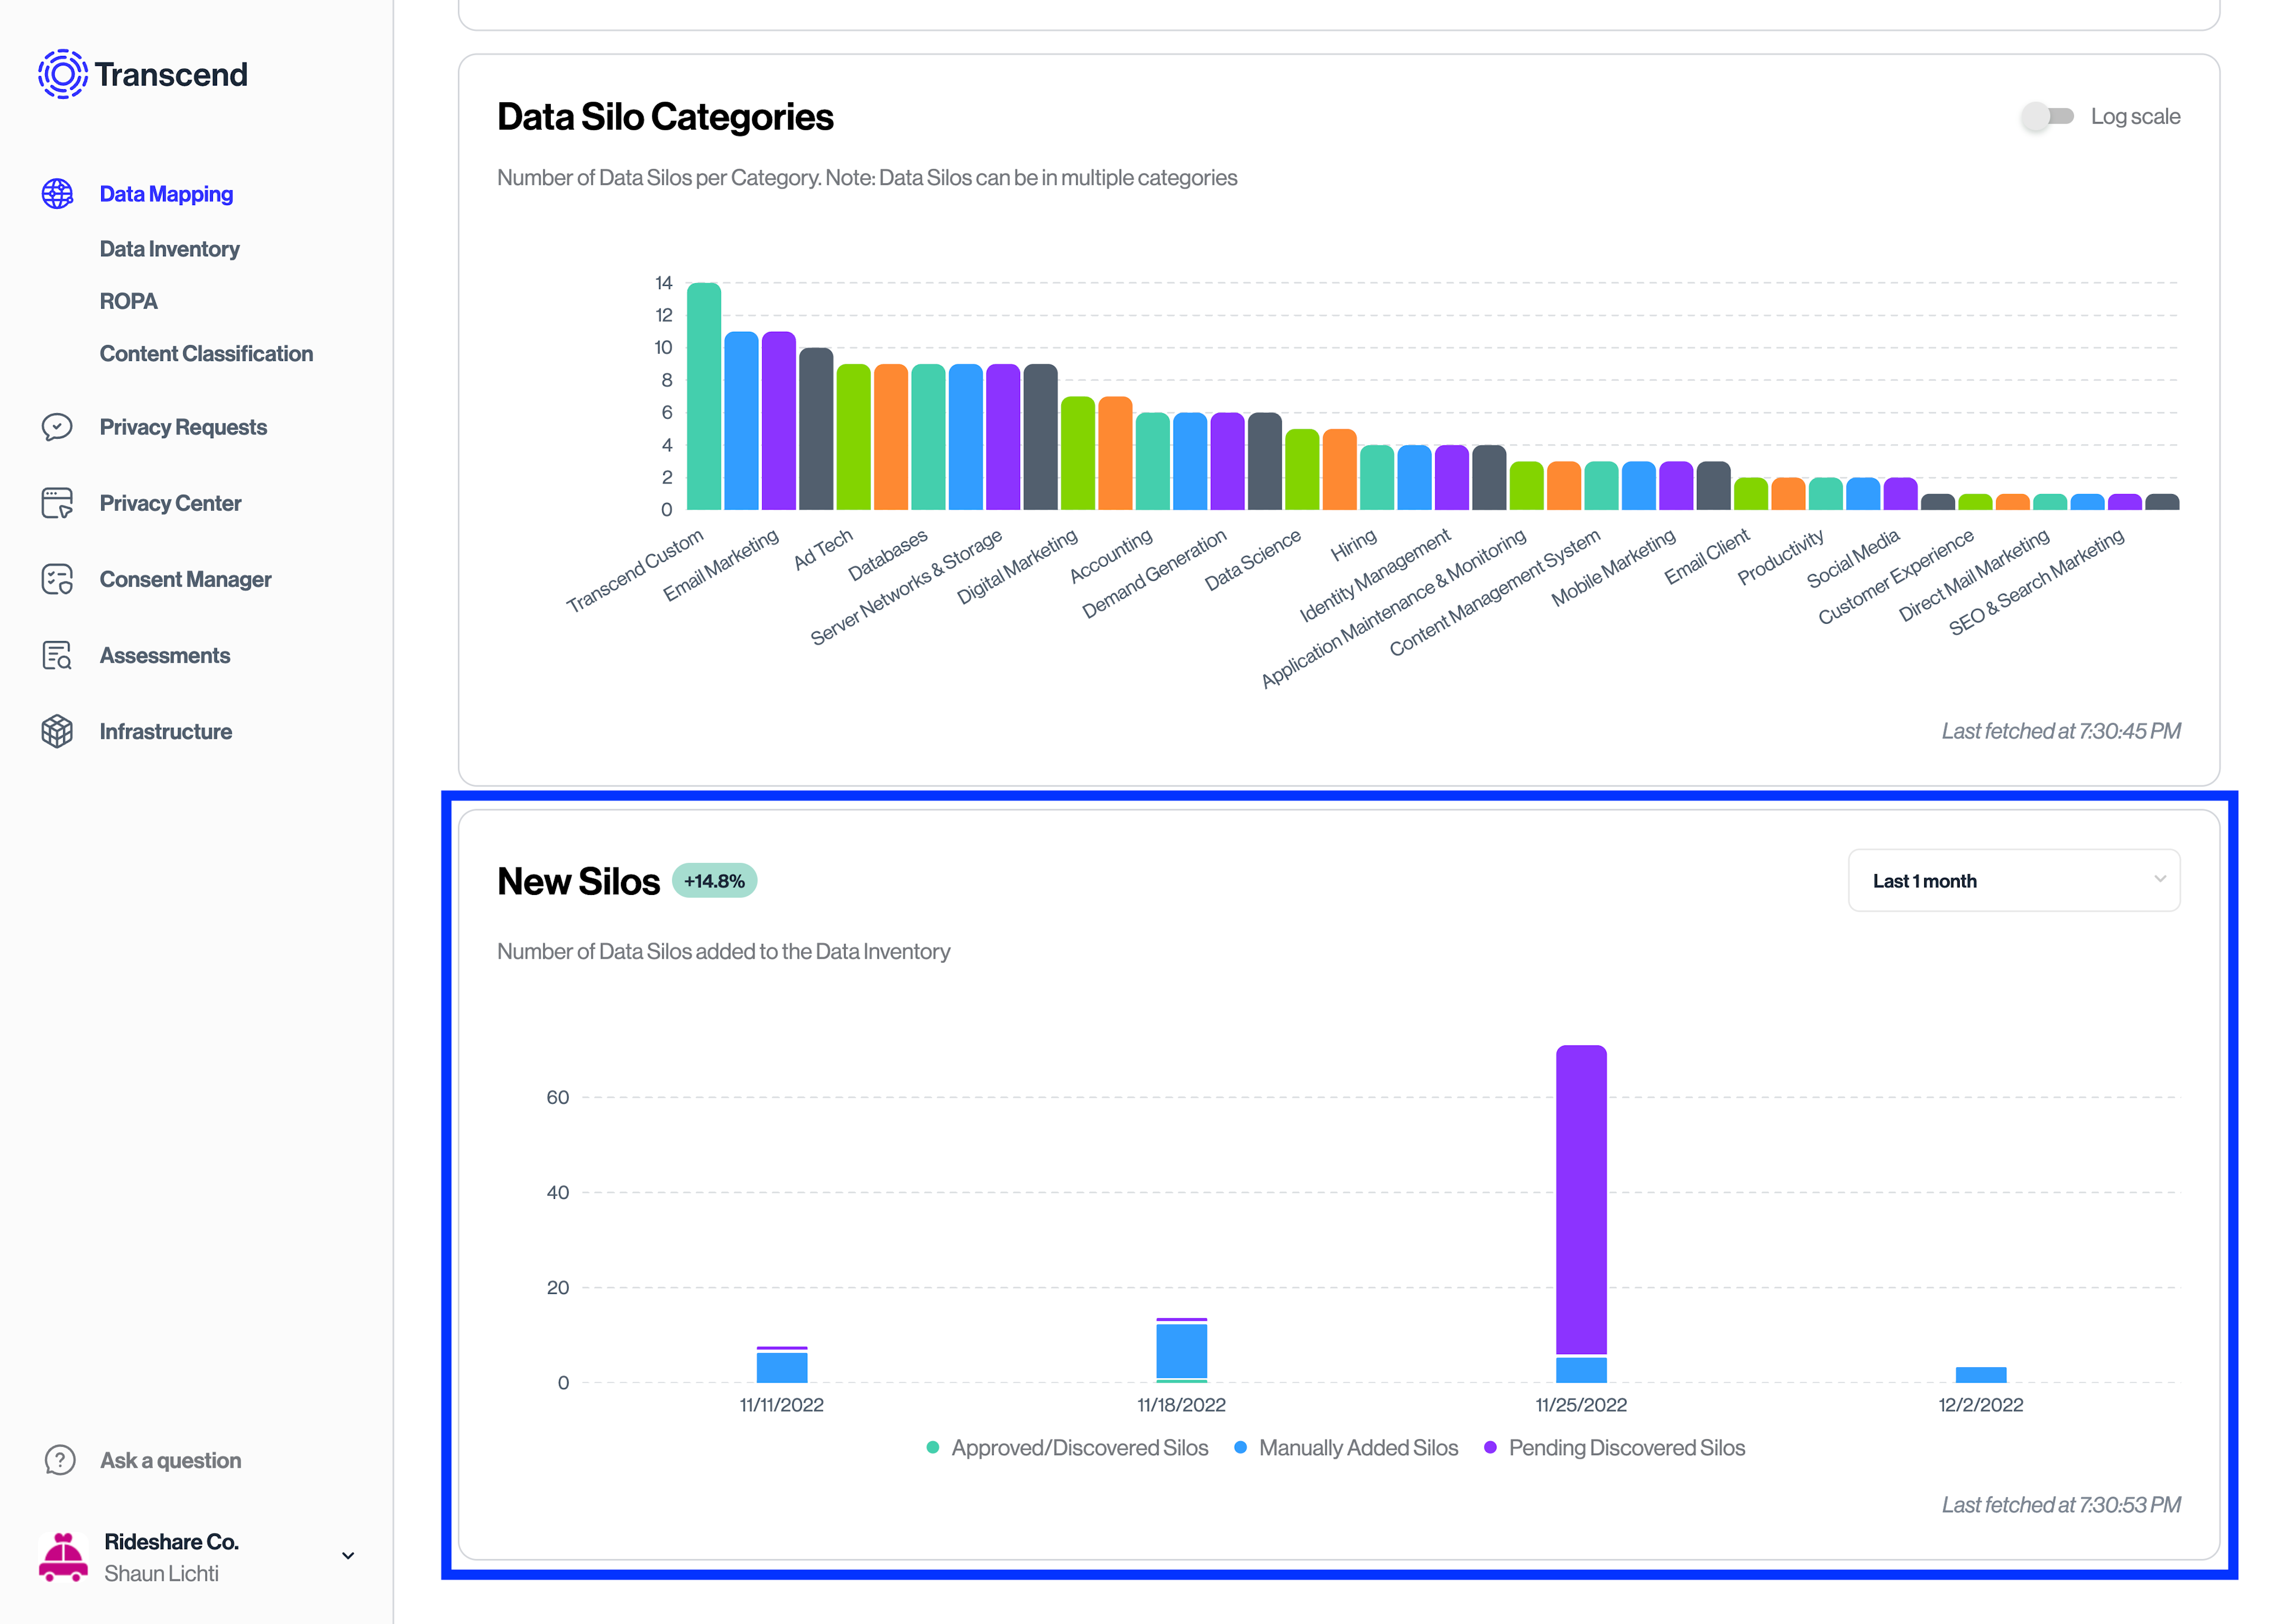 New Silos graph on Transcend Data Mapping Dashboard